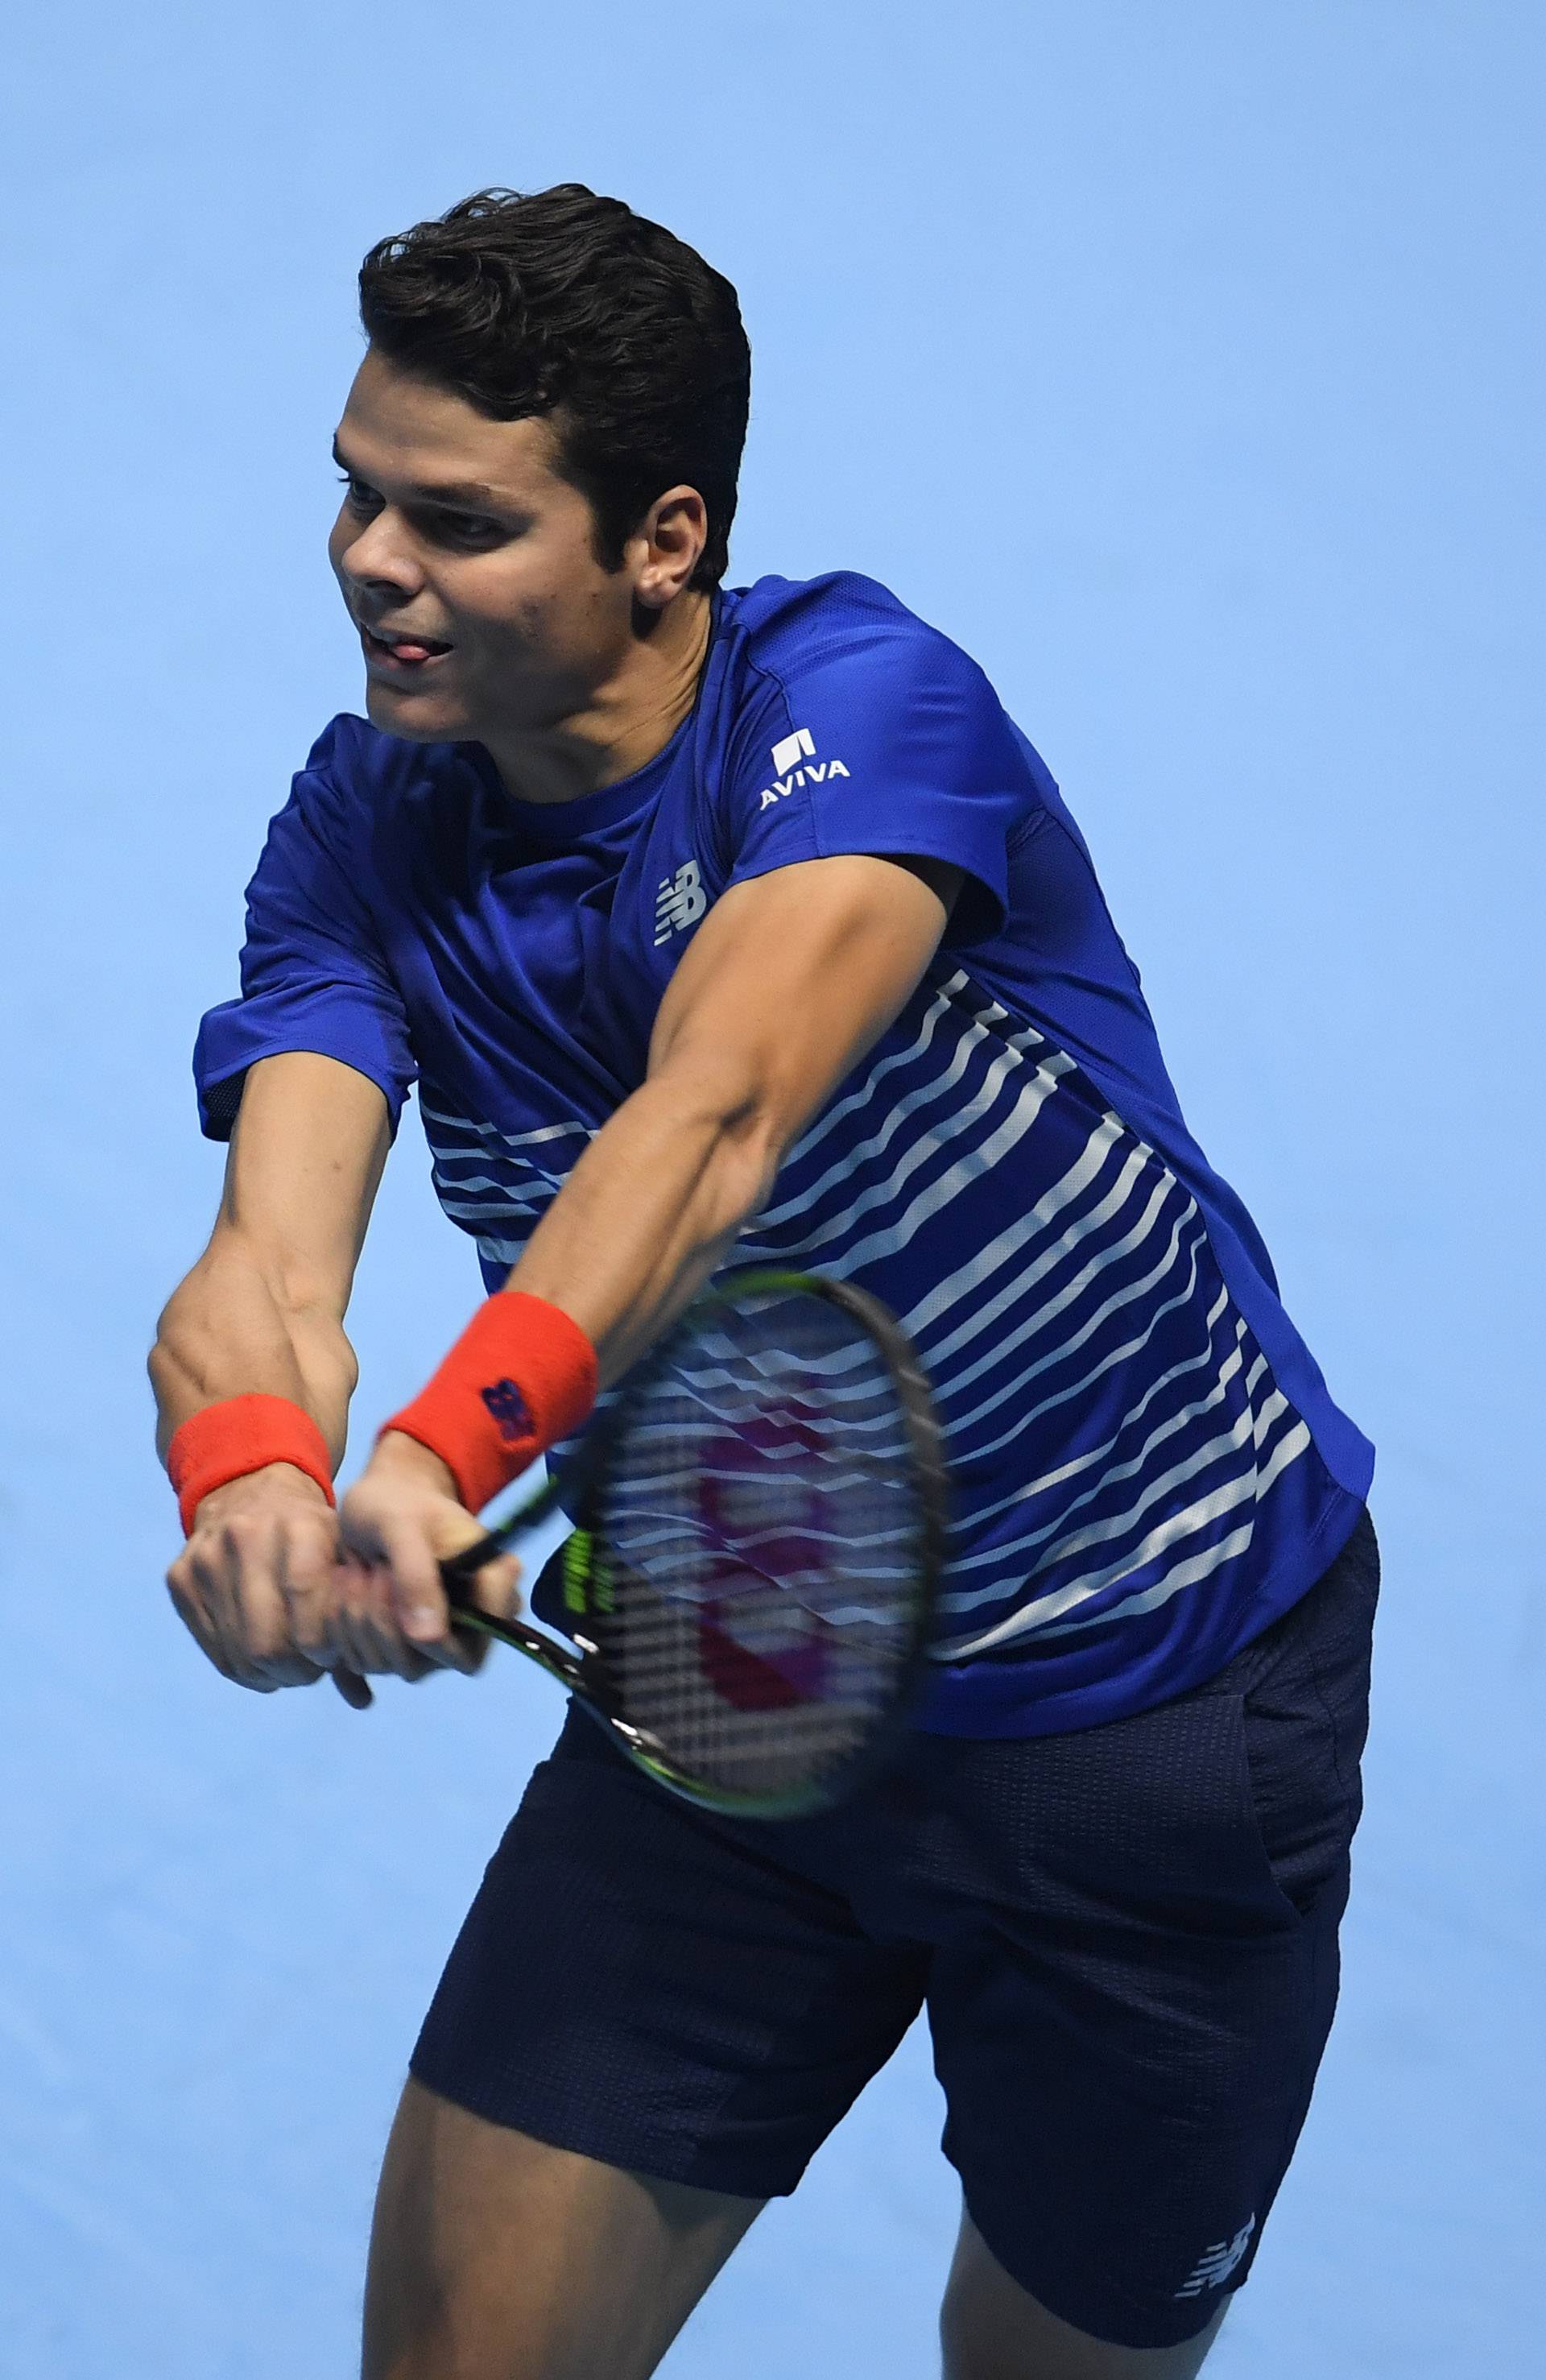 Canada's Milos Raonic in action during his round robin match with Austria's Dominic Thiem